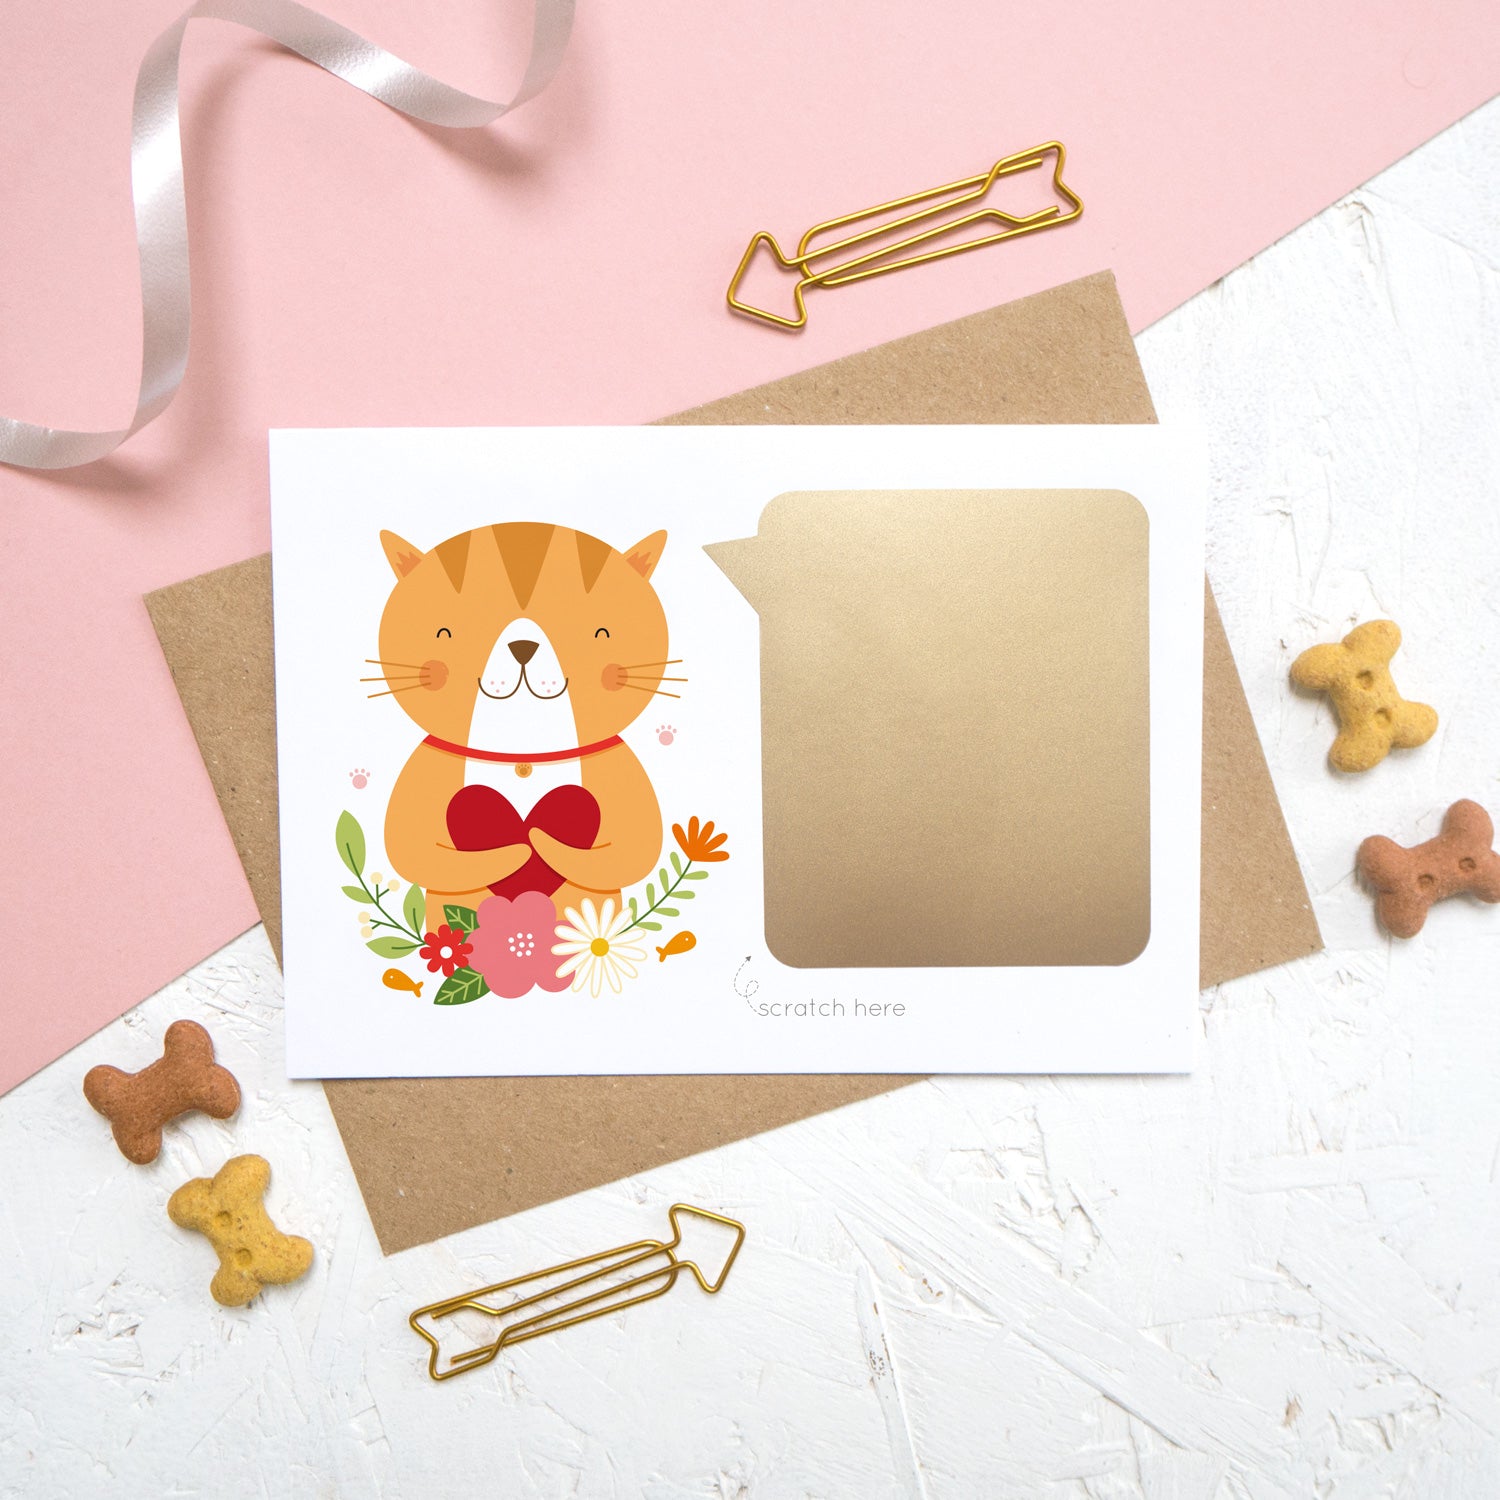 The personalised cat card once the golden scratch panel has been attached.